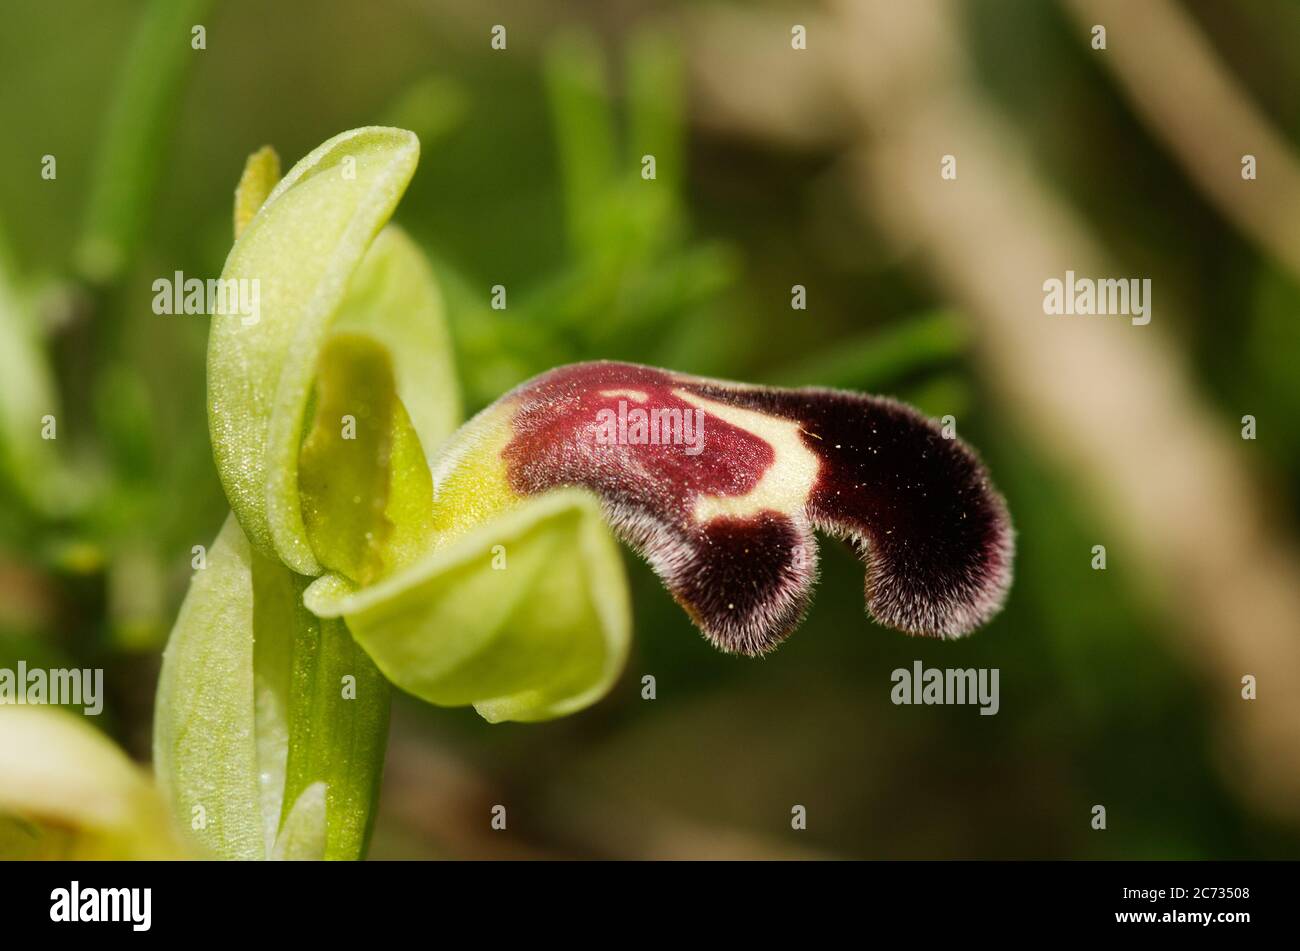 Profile view of a red macula version of the wild orchid Omega Ophrys flower (Ophrys dyris aka Ophrys omegaifera subsp. dyris) over a natural backgroun Stock Photo